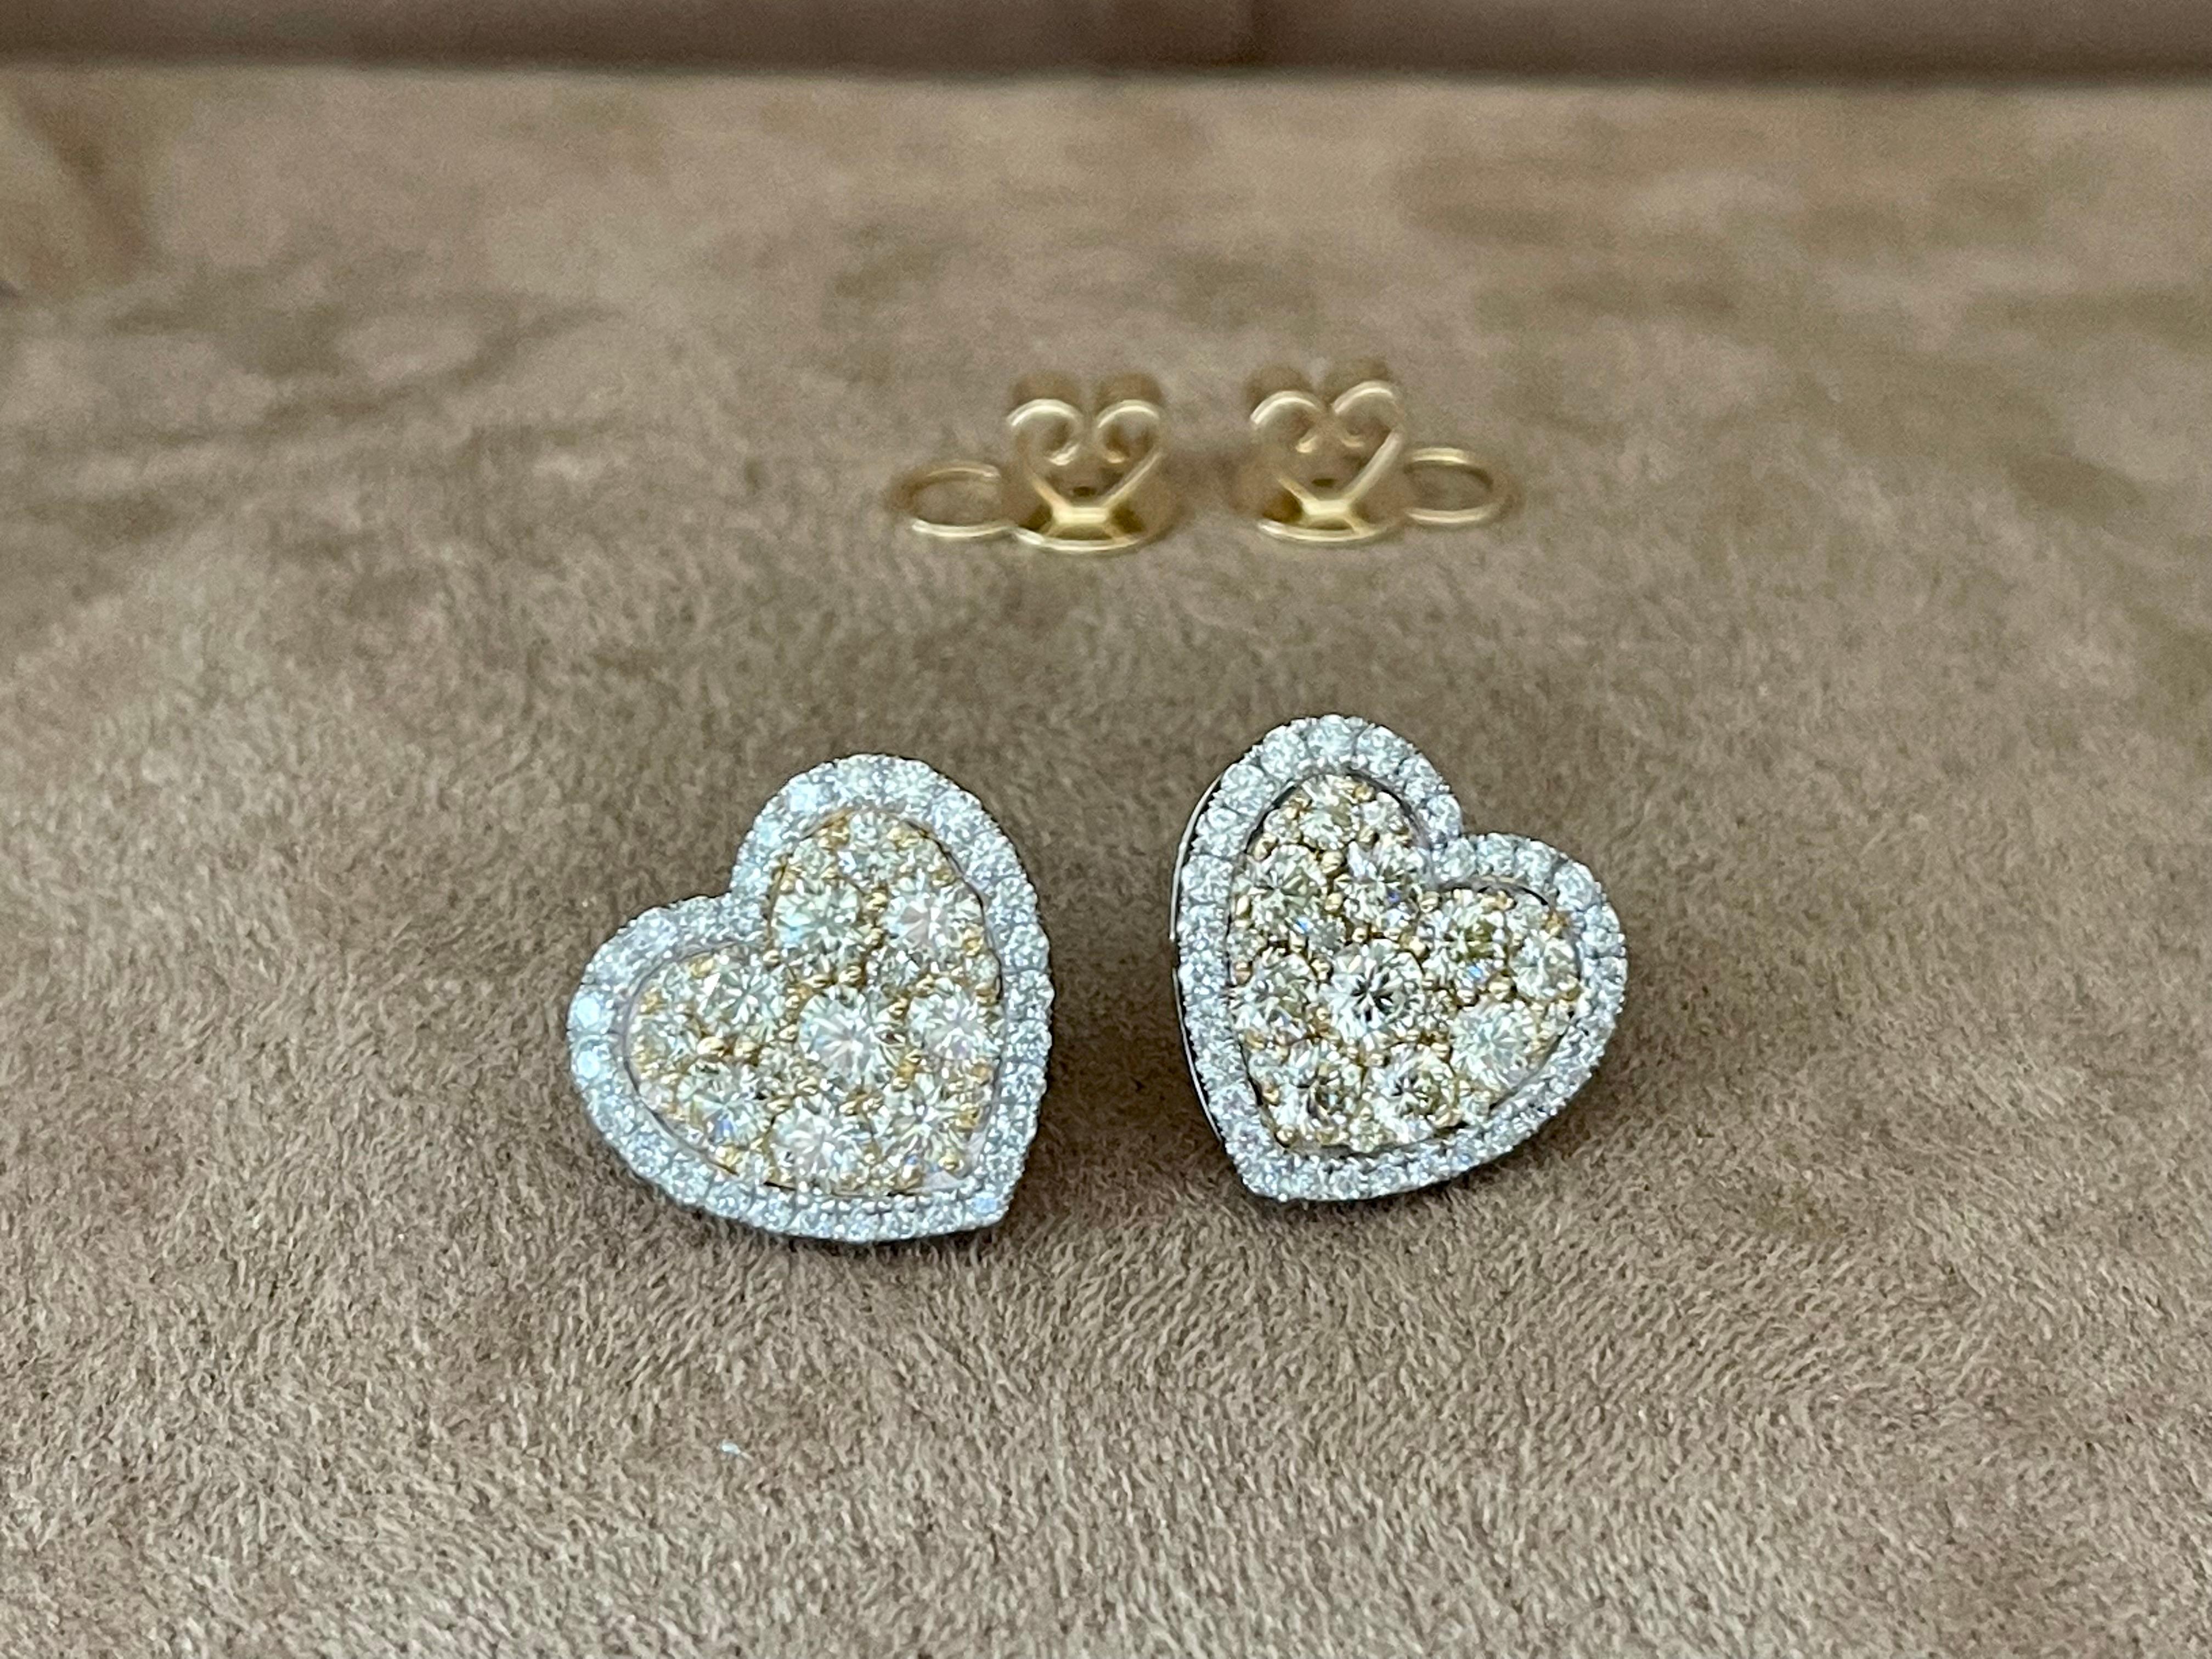 14 K Yelllow and White Gold 3.86 Total Carat Heart Shaped Earrings For Sale 1